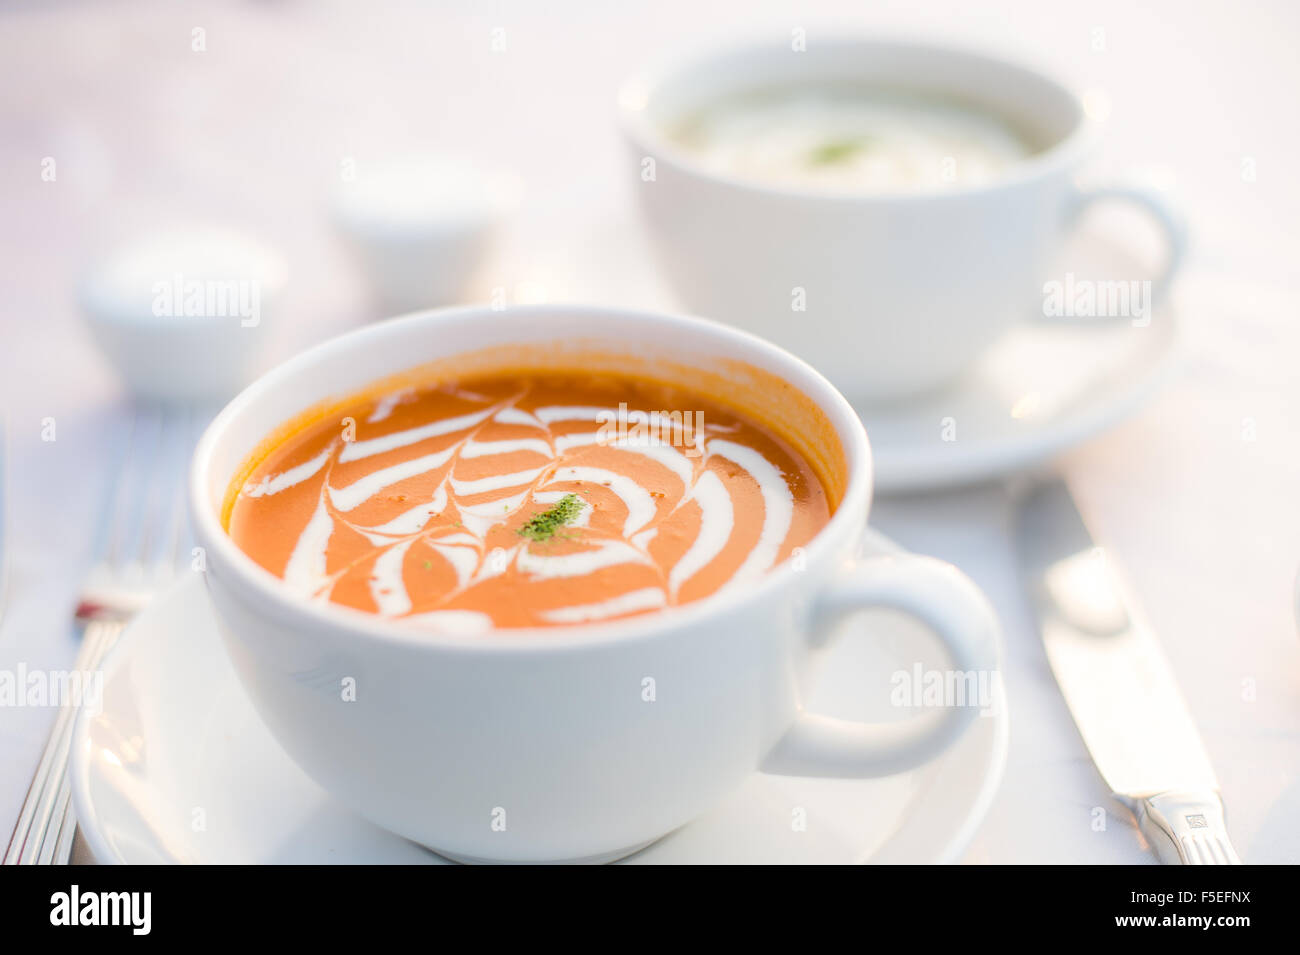 Cups of mushroom soup and tomato bisque, Penang, Malaysia Stock Photo